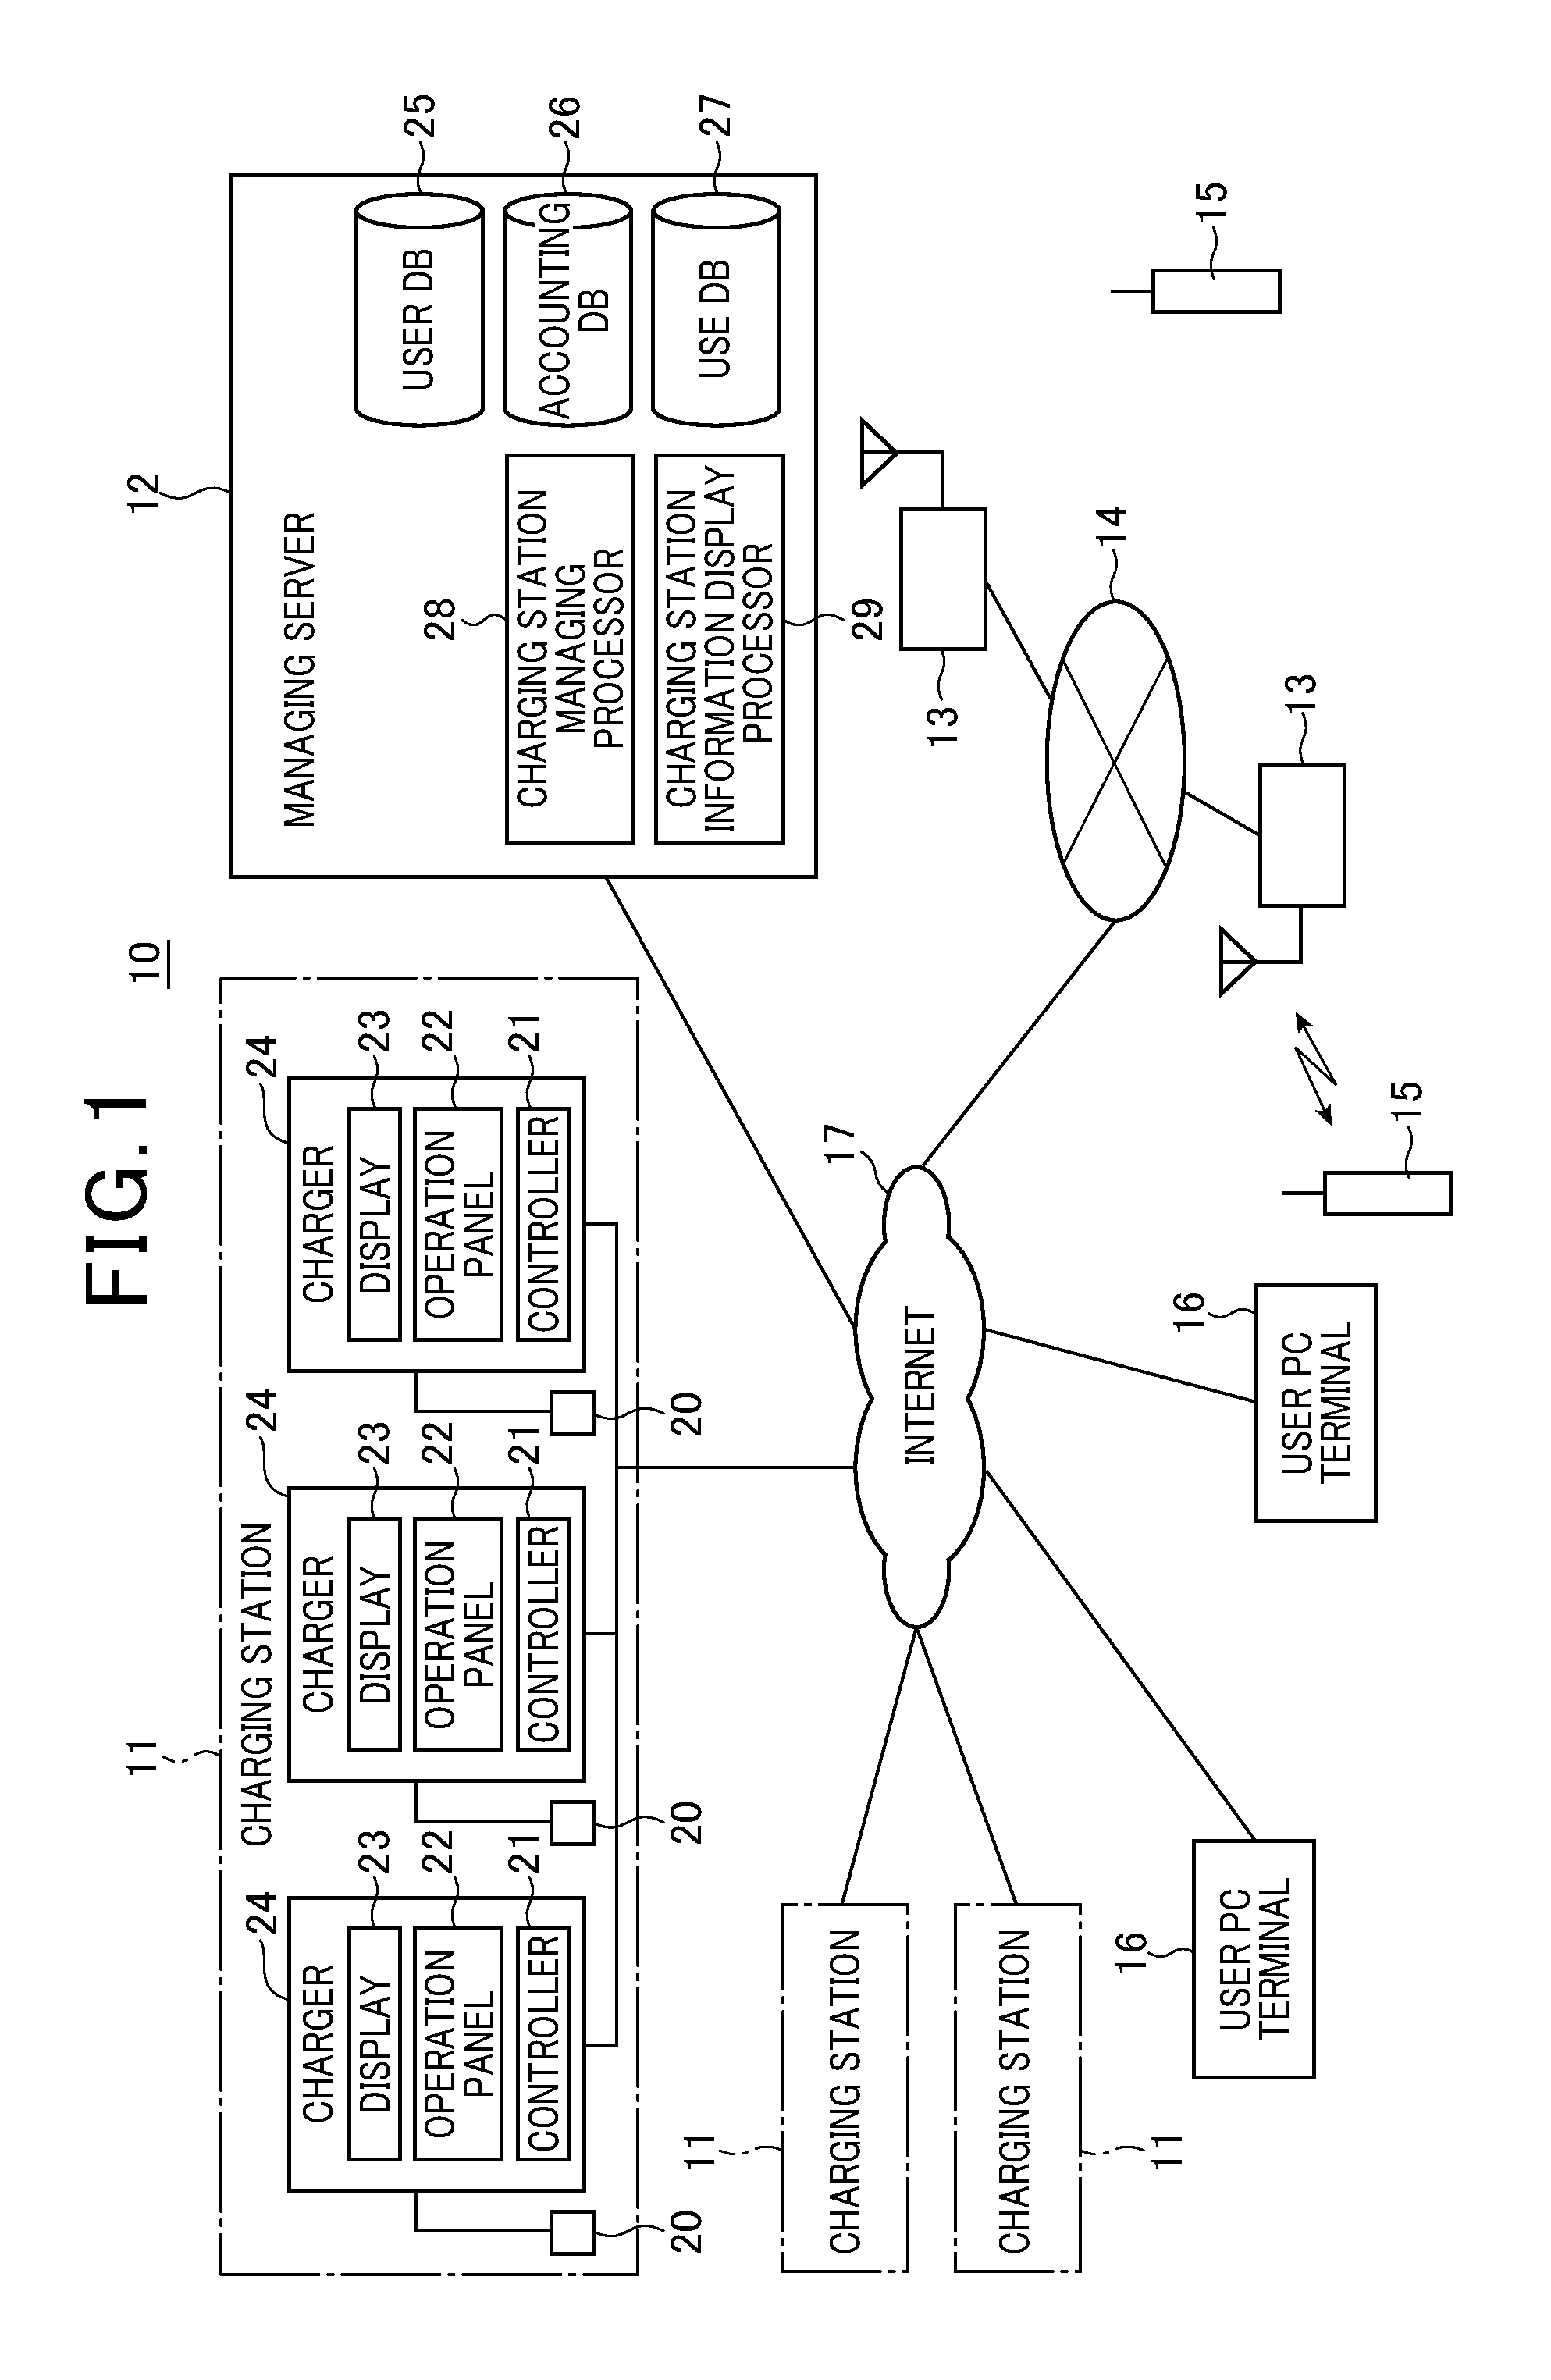 Operation managing server for charging stations and operation managing system for charging stations